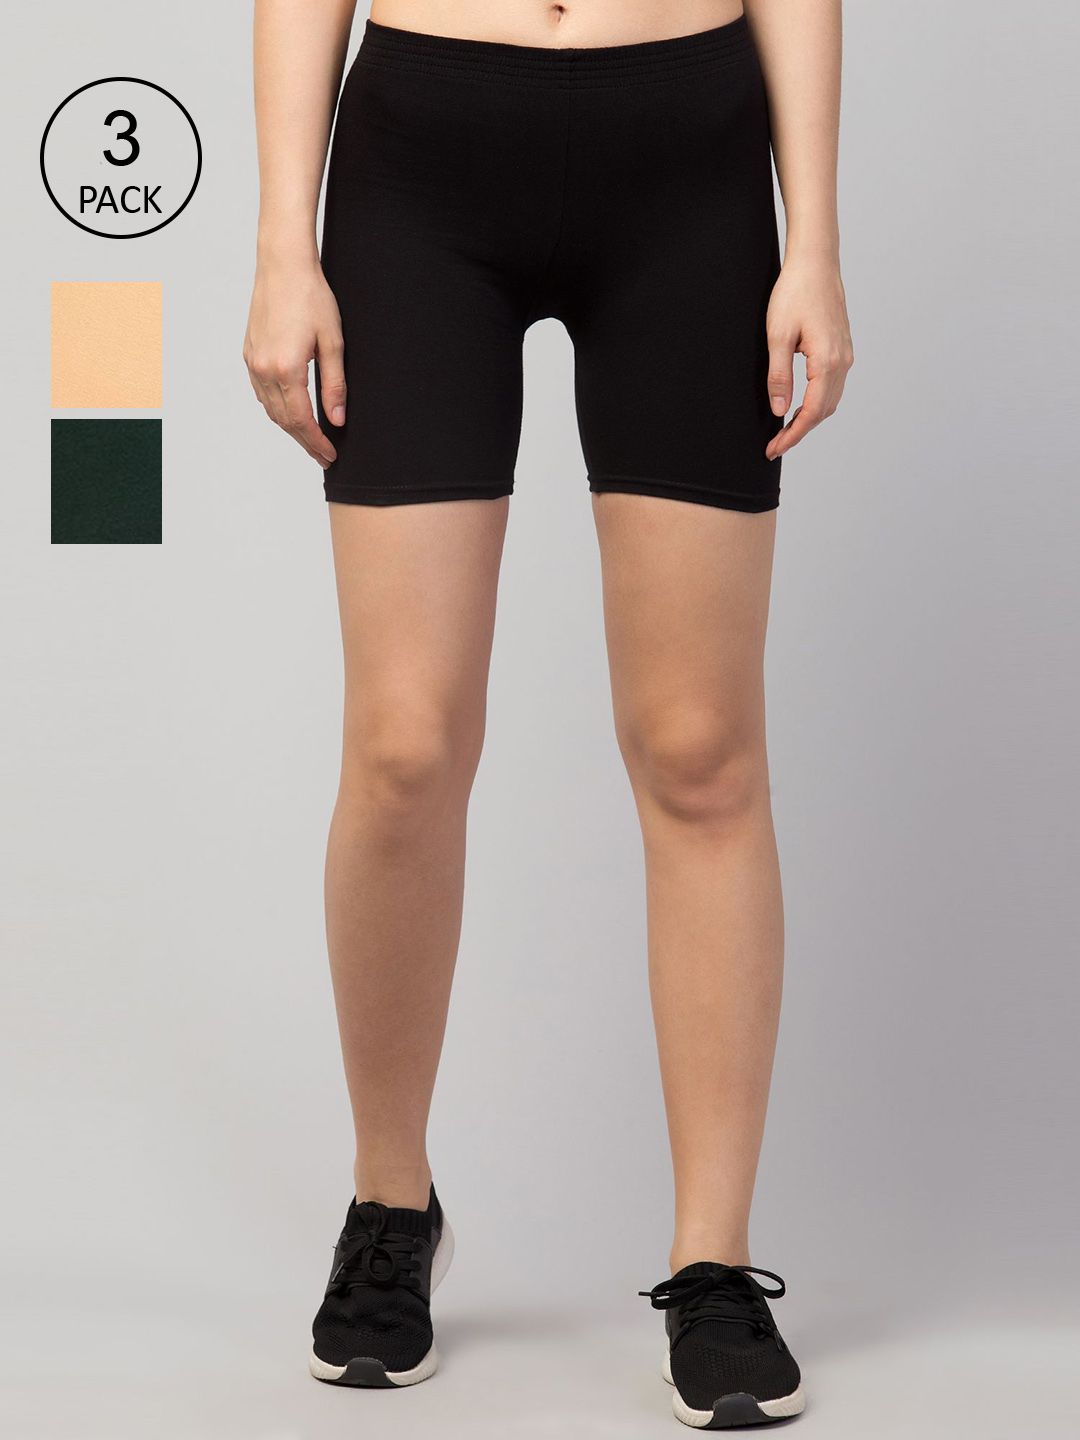 Apraa & Parma Women Black and Beige Pack of 3 Slim Fit Cycling Sports Shorts Price in India